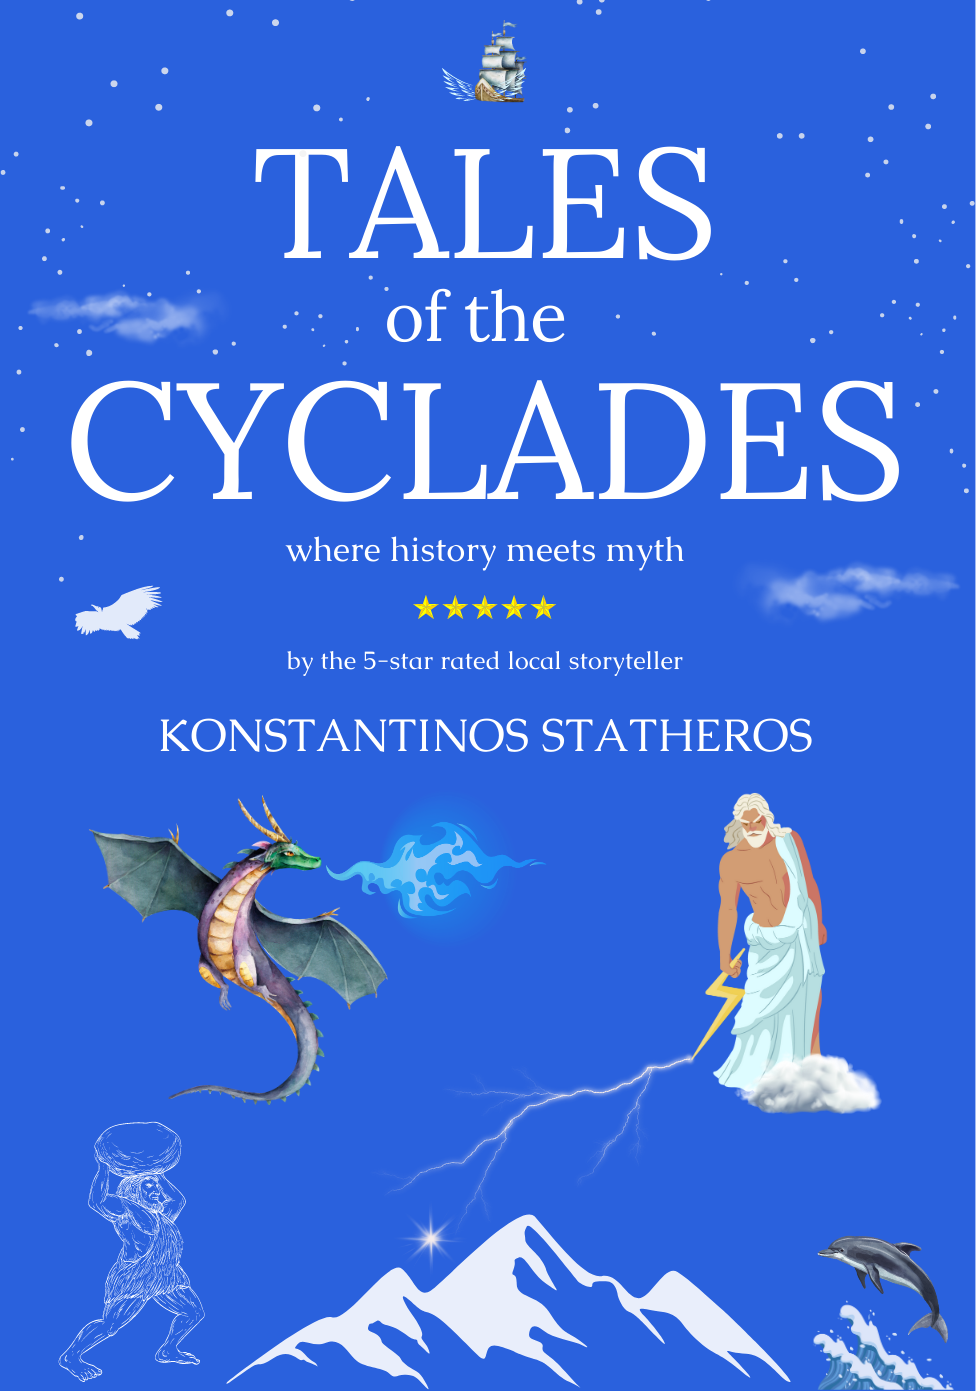 Tales of the Cyclades - Konstantinos Statheros